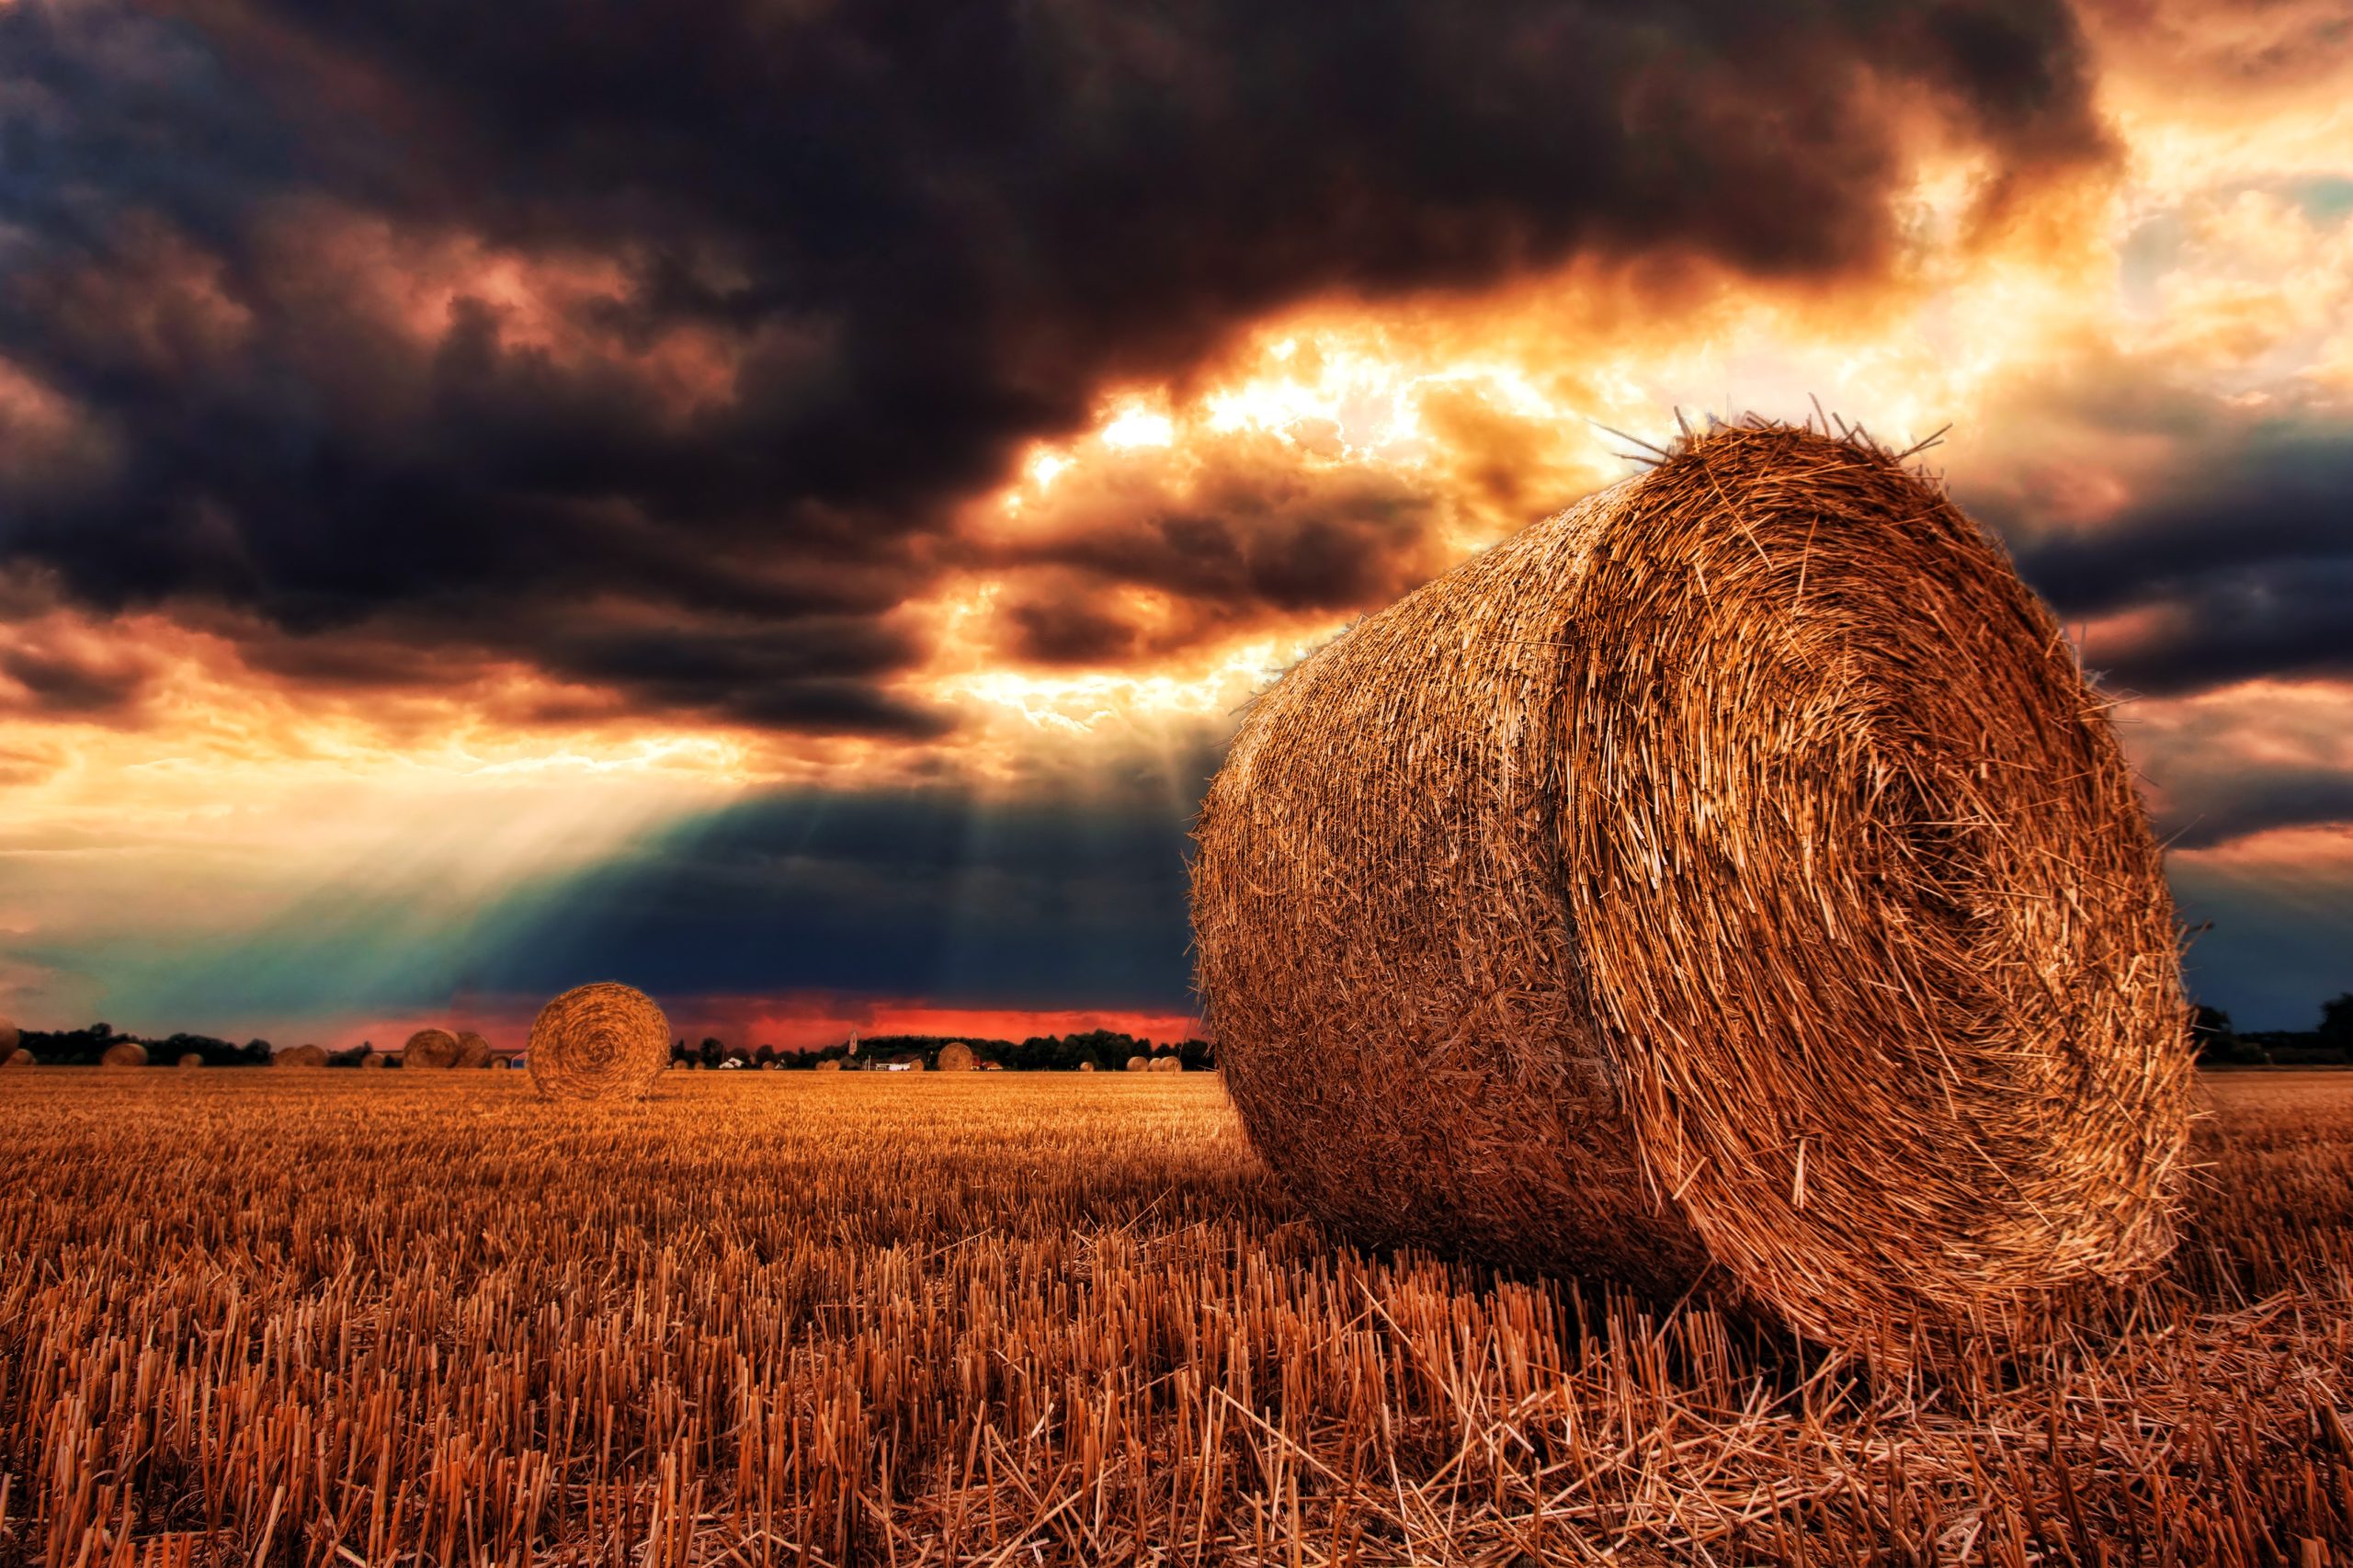 hay bale in field with overcast sky